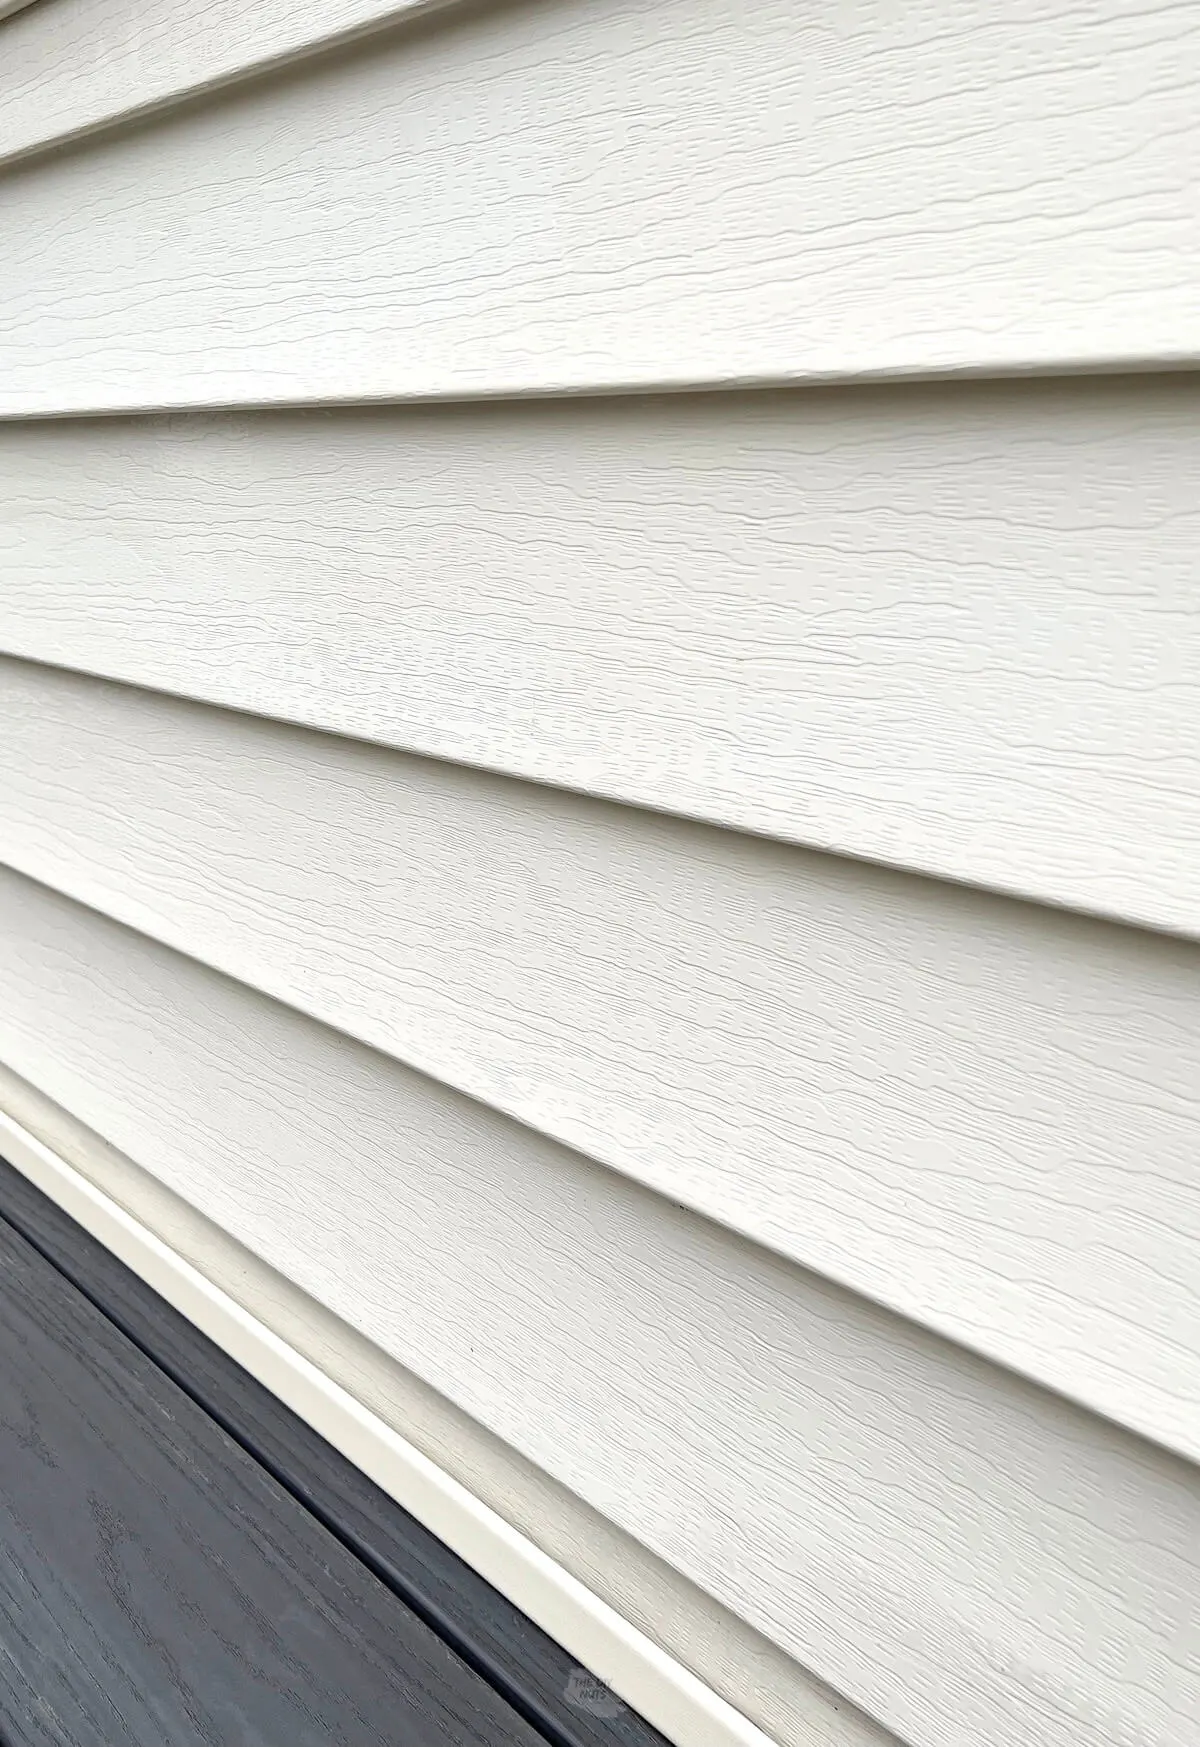 clean vinyl siding after using homemade eco-friendly cleaner.